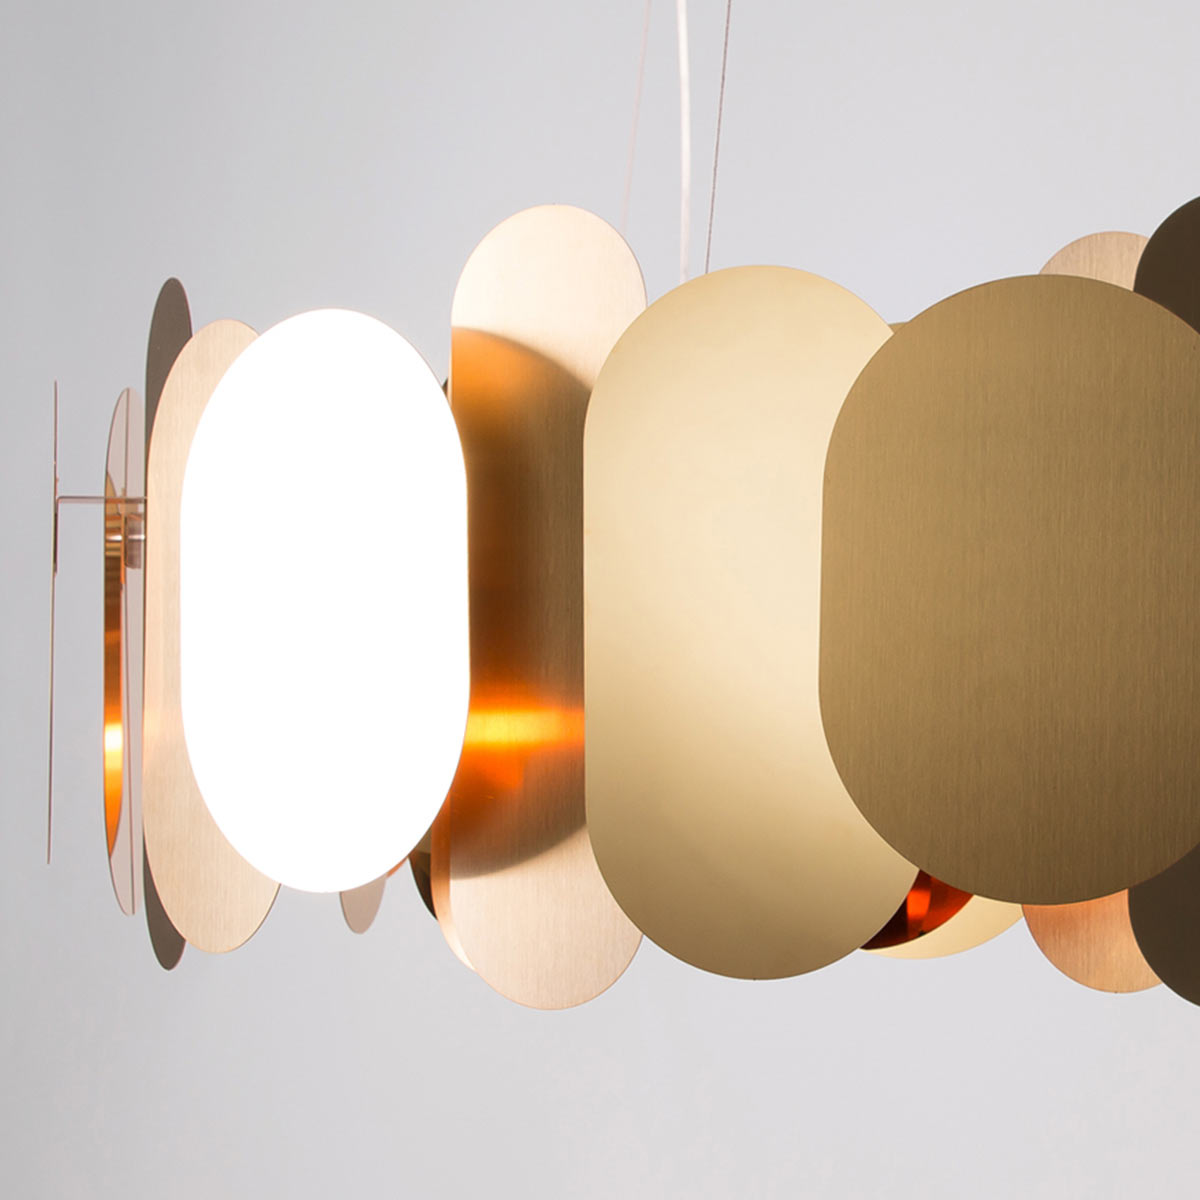 Innermost Panel Chandelier by Olson and Baker - Designer & Contemporary Sofas, Furniture - Olson and Baker showcases original designs from authentic, designer brands. Buy contemporary furniture, lighting, storage, sofas & chairs at Olson + Baker.